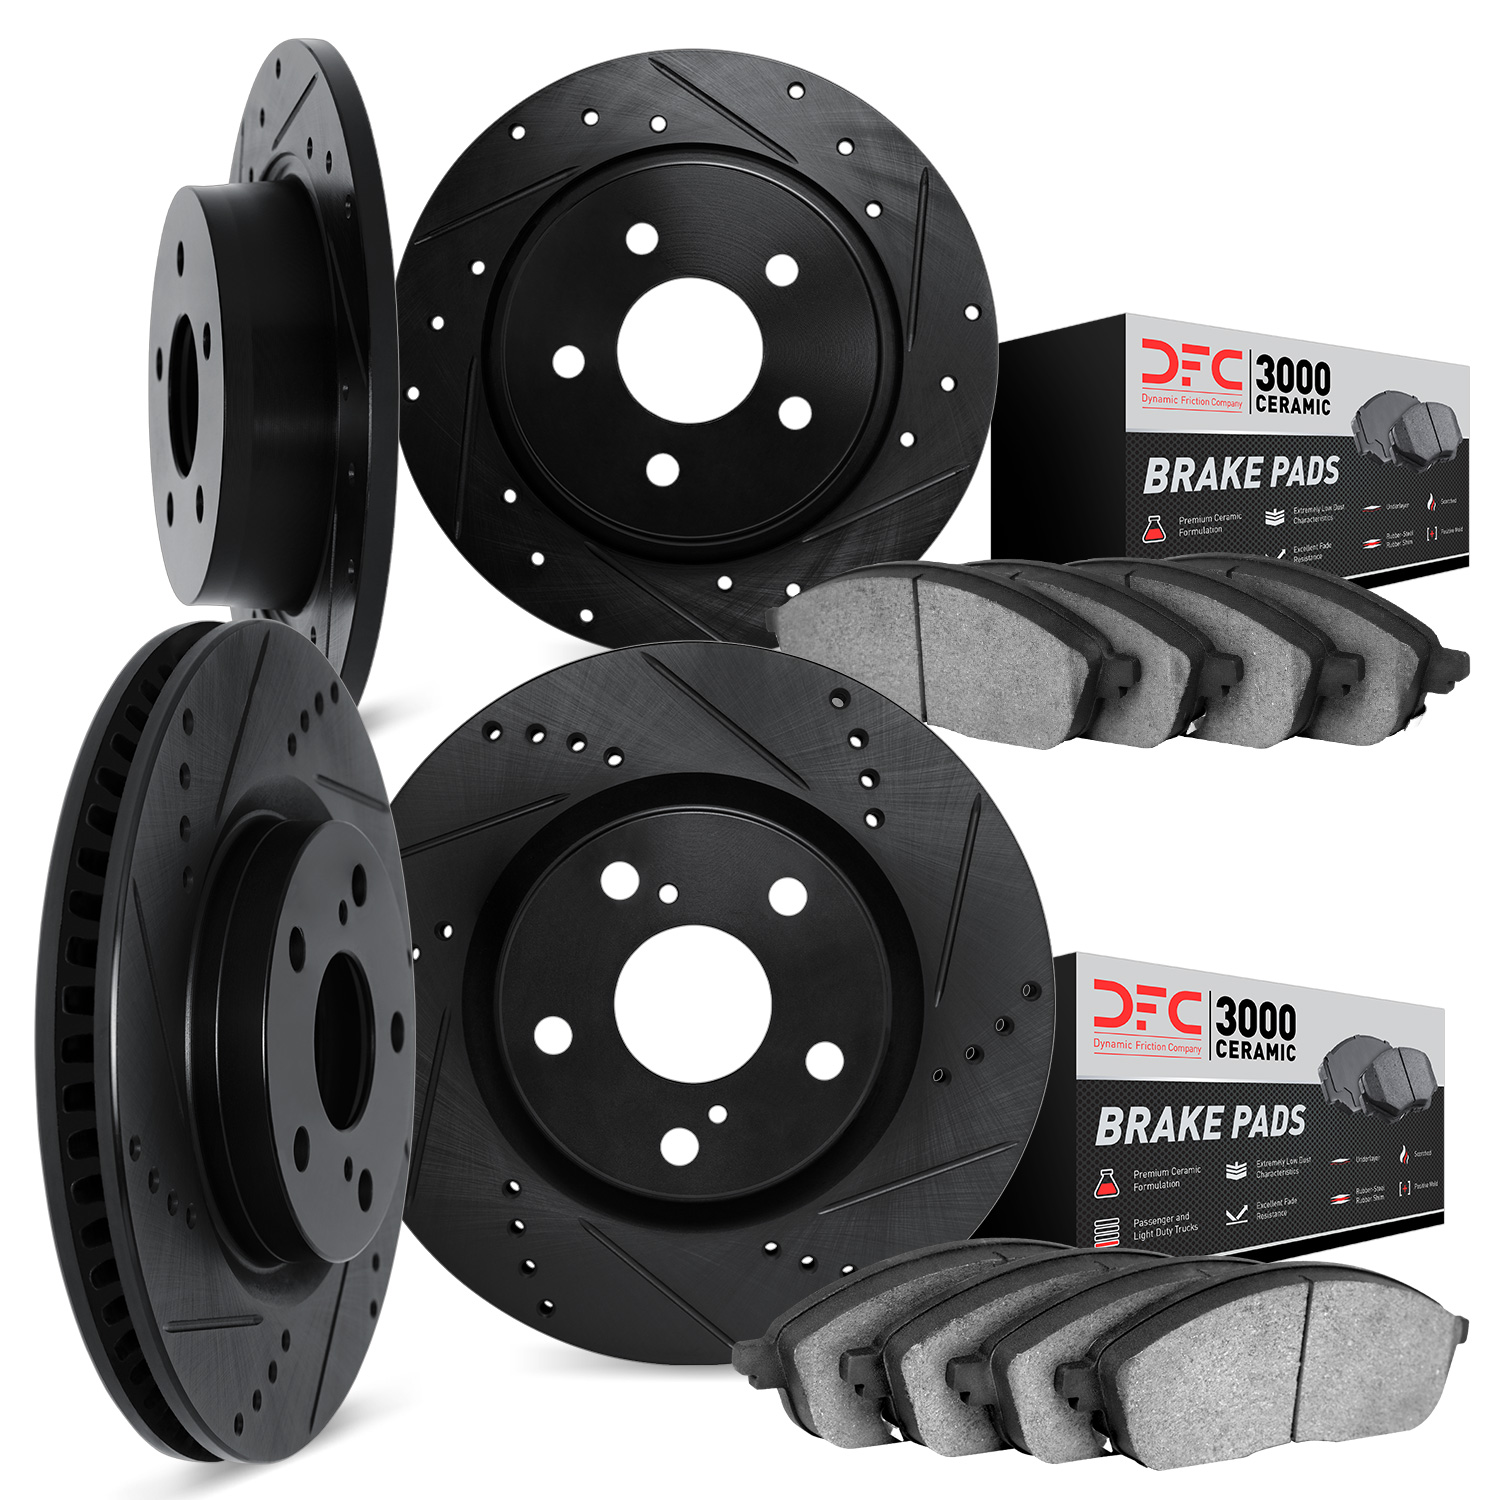 8304-13025 Drilled/Slotted Brake Rotors with 3000-Series Ceramic Brake Pads Kit [Black], 2008-2008 Subaru, Position: Front and R